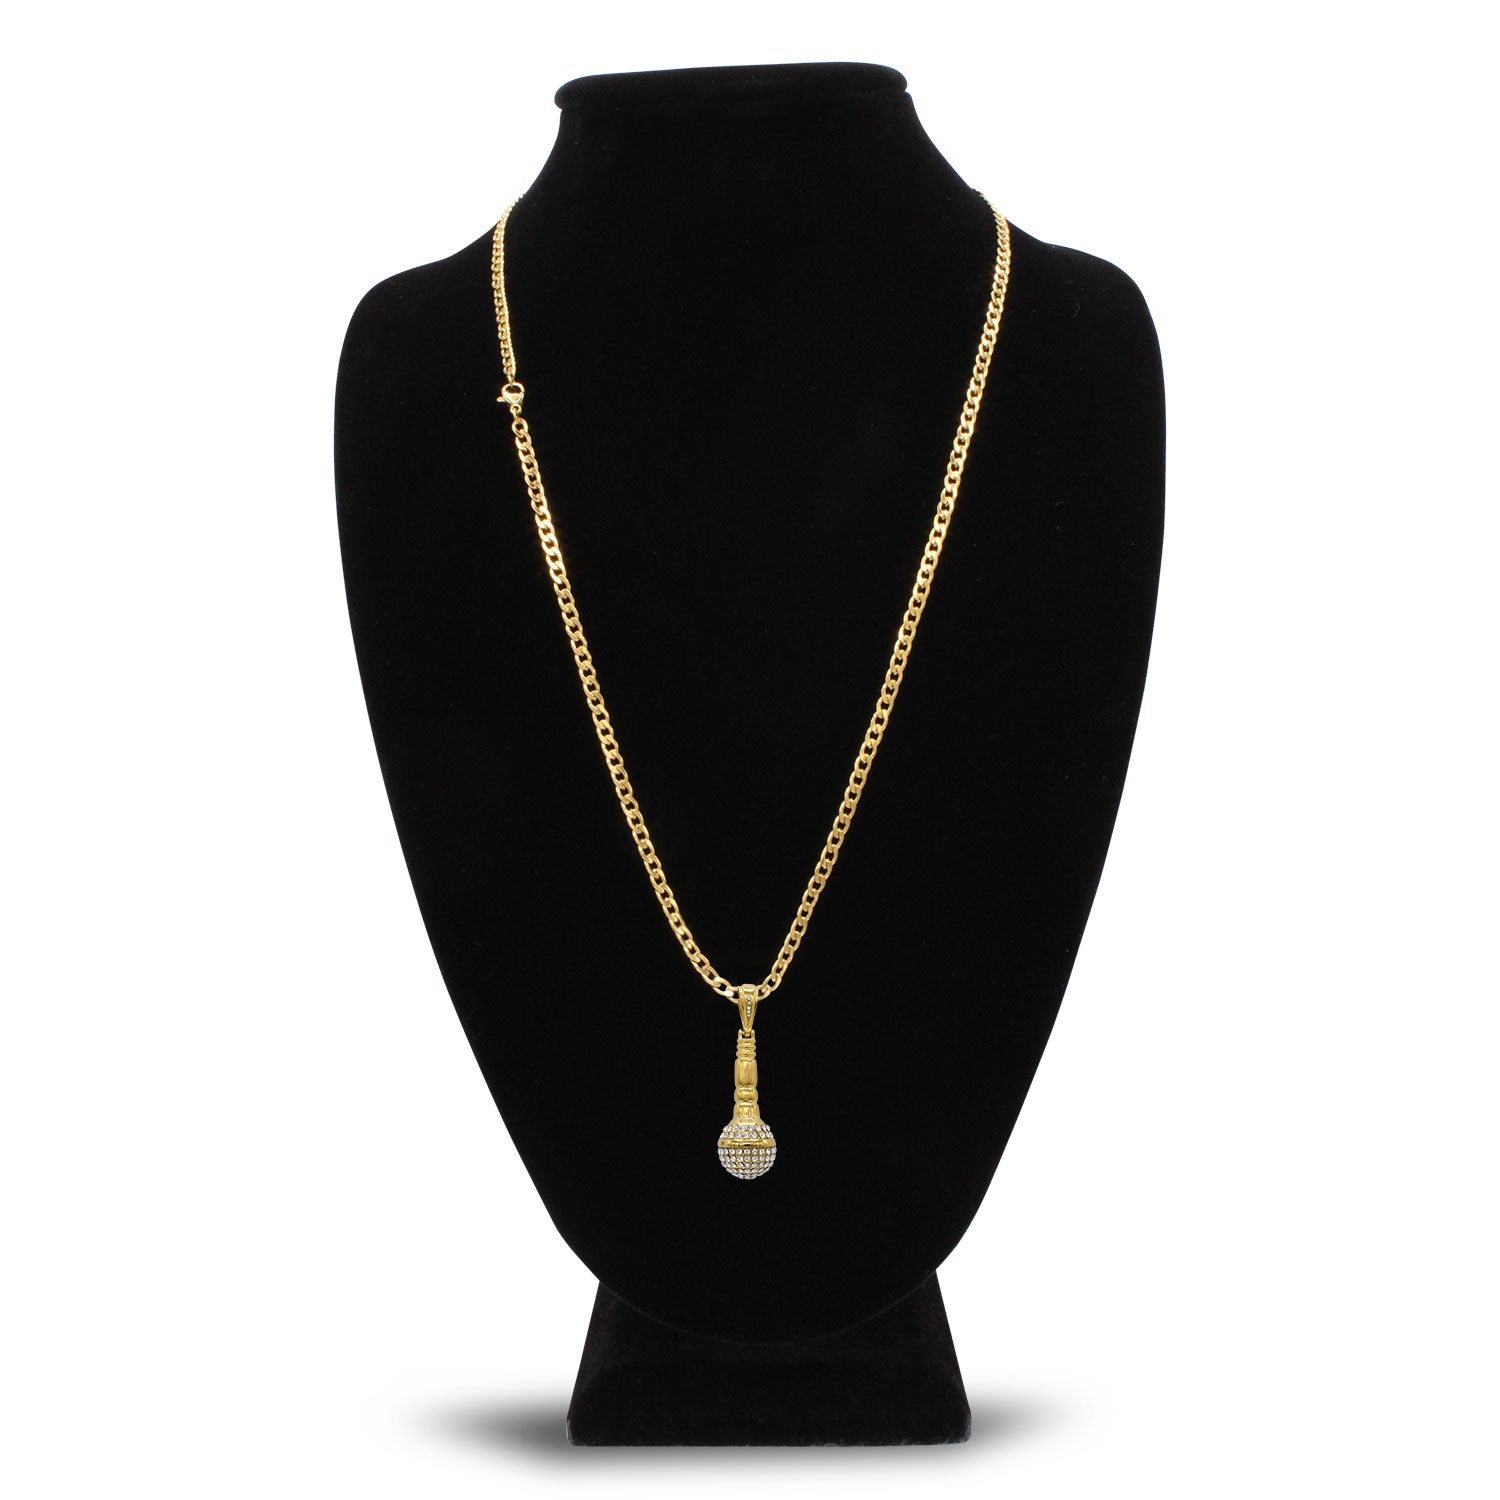 Microphone Cubic Zirconia Pendant with Necklace Set 14K Gold Plated Stainless Steel